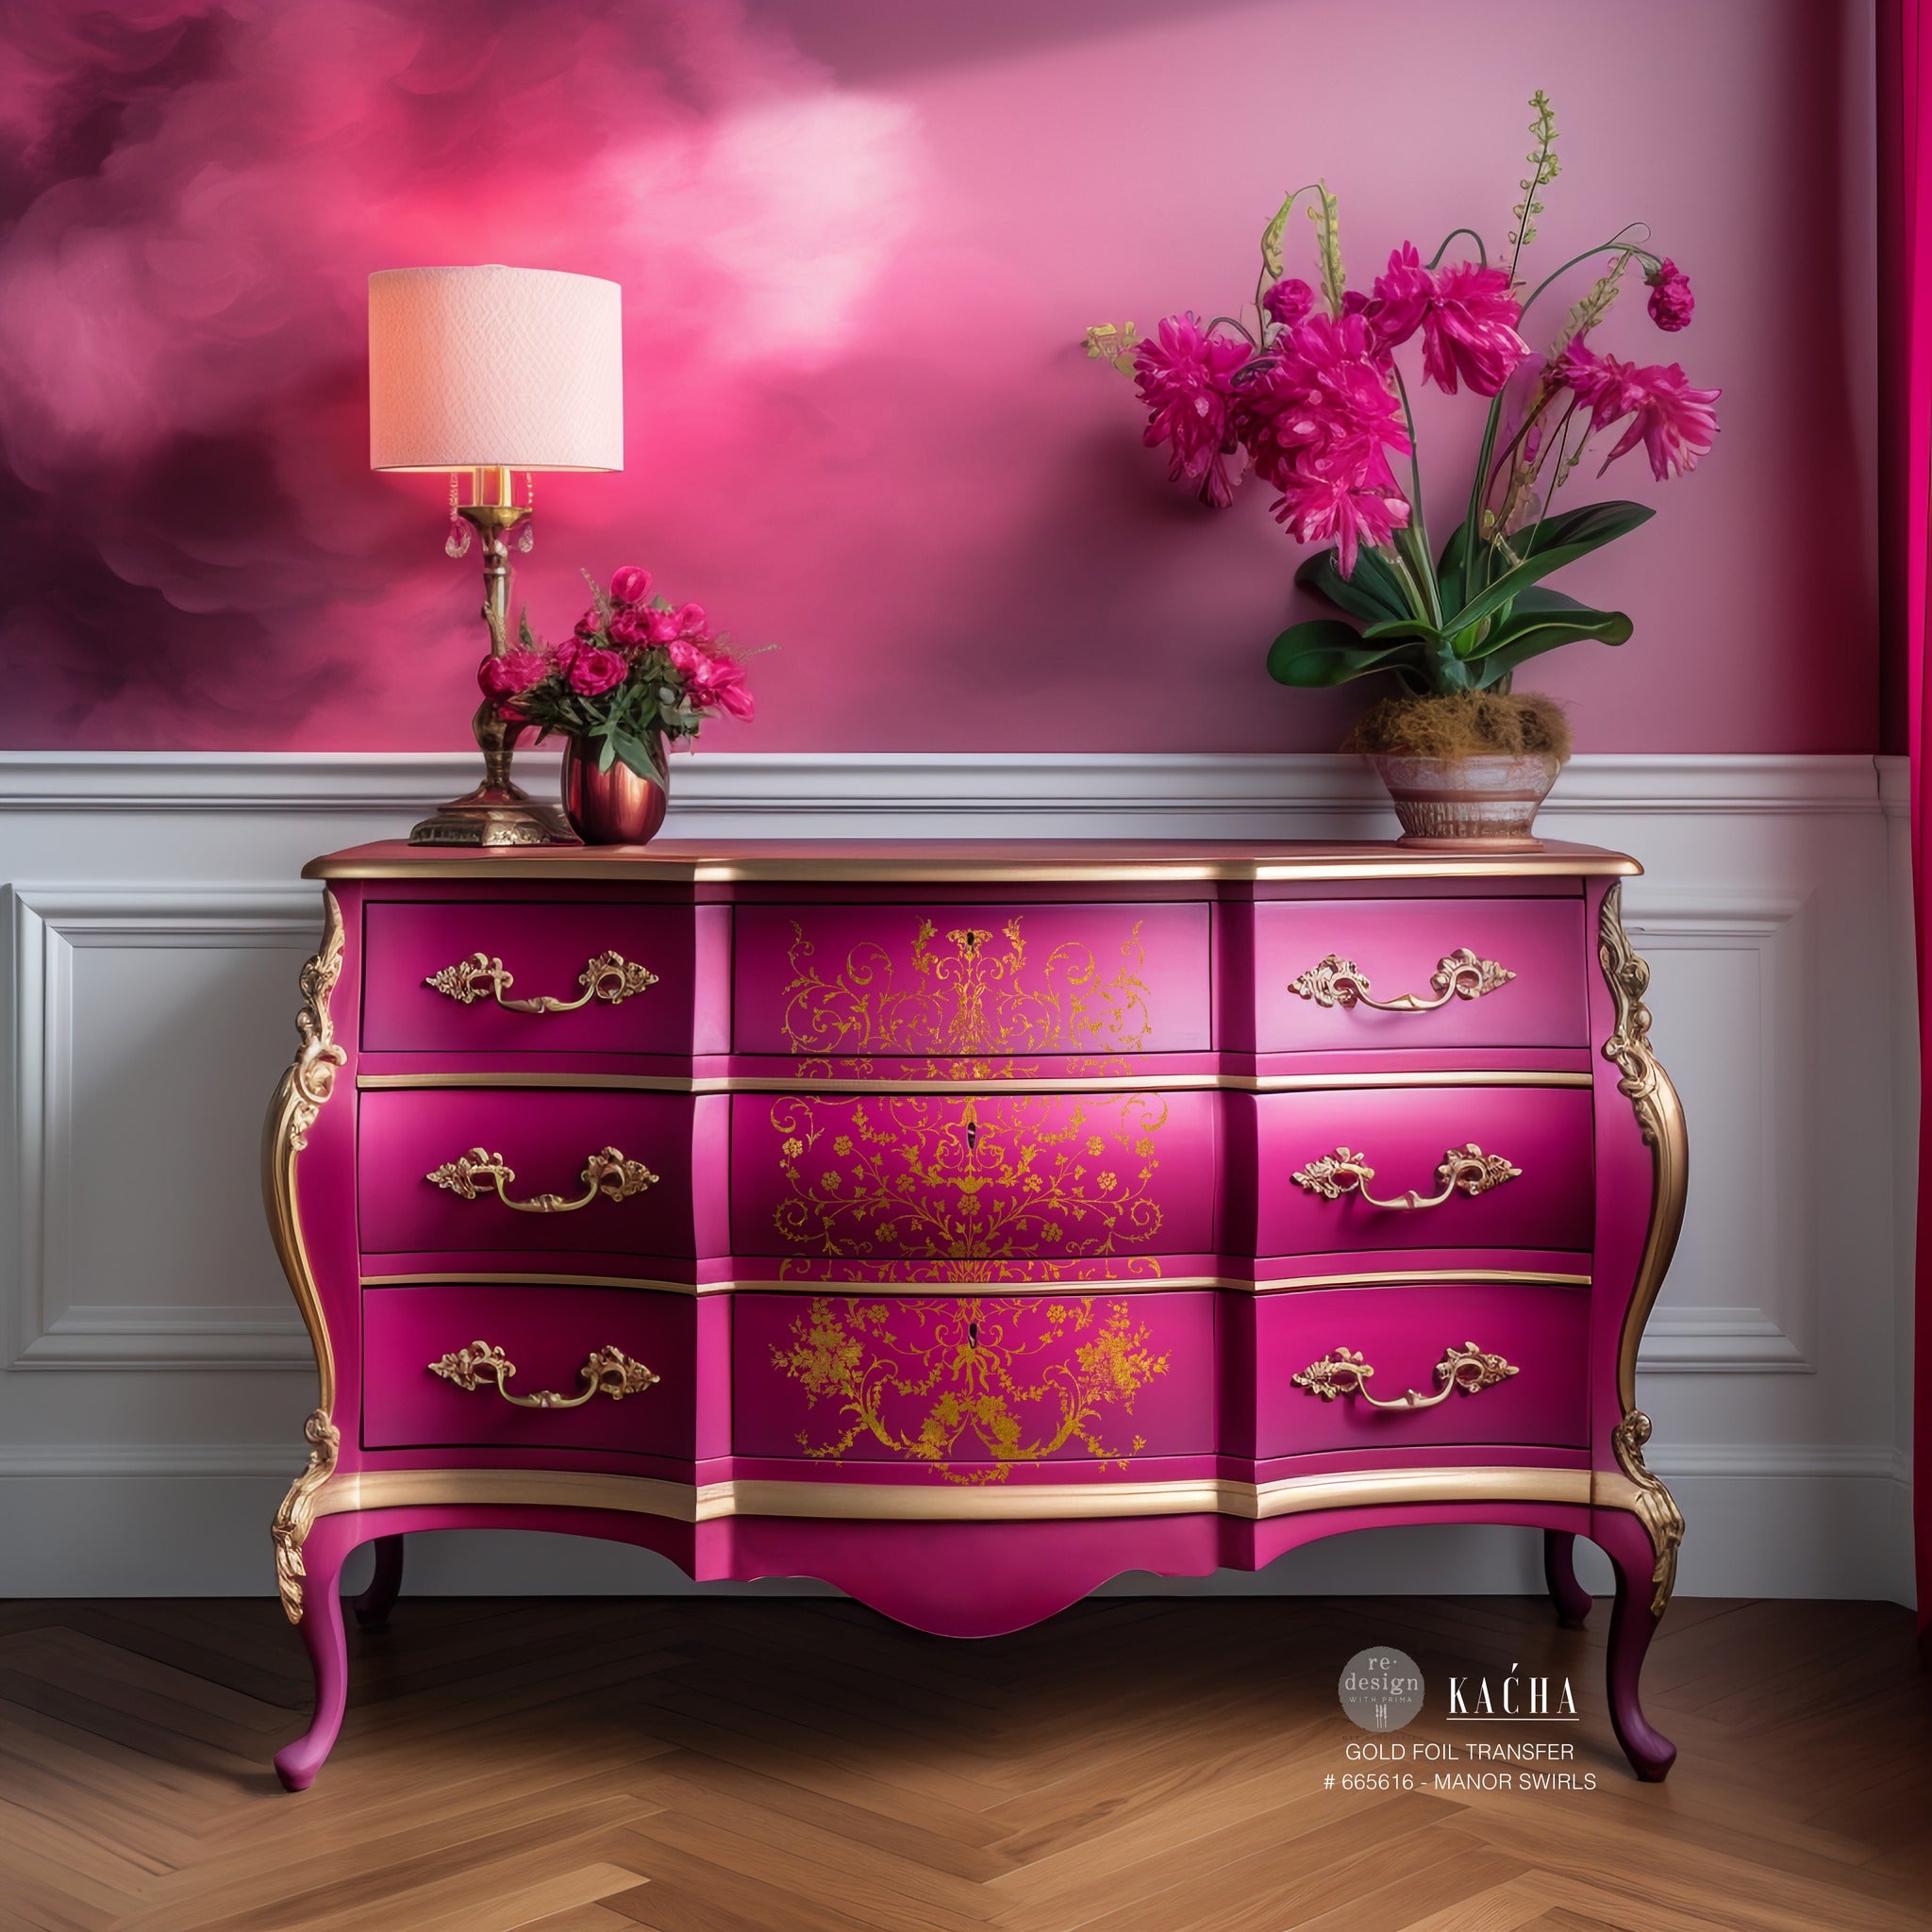 A large 9-drawer Bombay style dresser refurbished by Kacha is painted a rich pink with gold accents and features ReDesign with Prima's Kacha Manor Swirls gold foil transfer on its 3 center drawers.